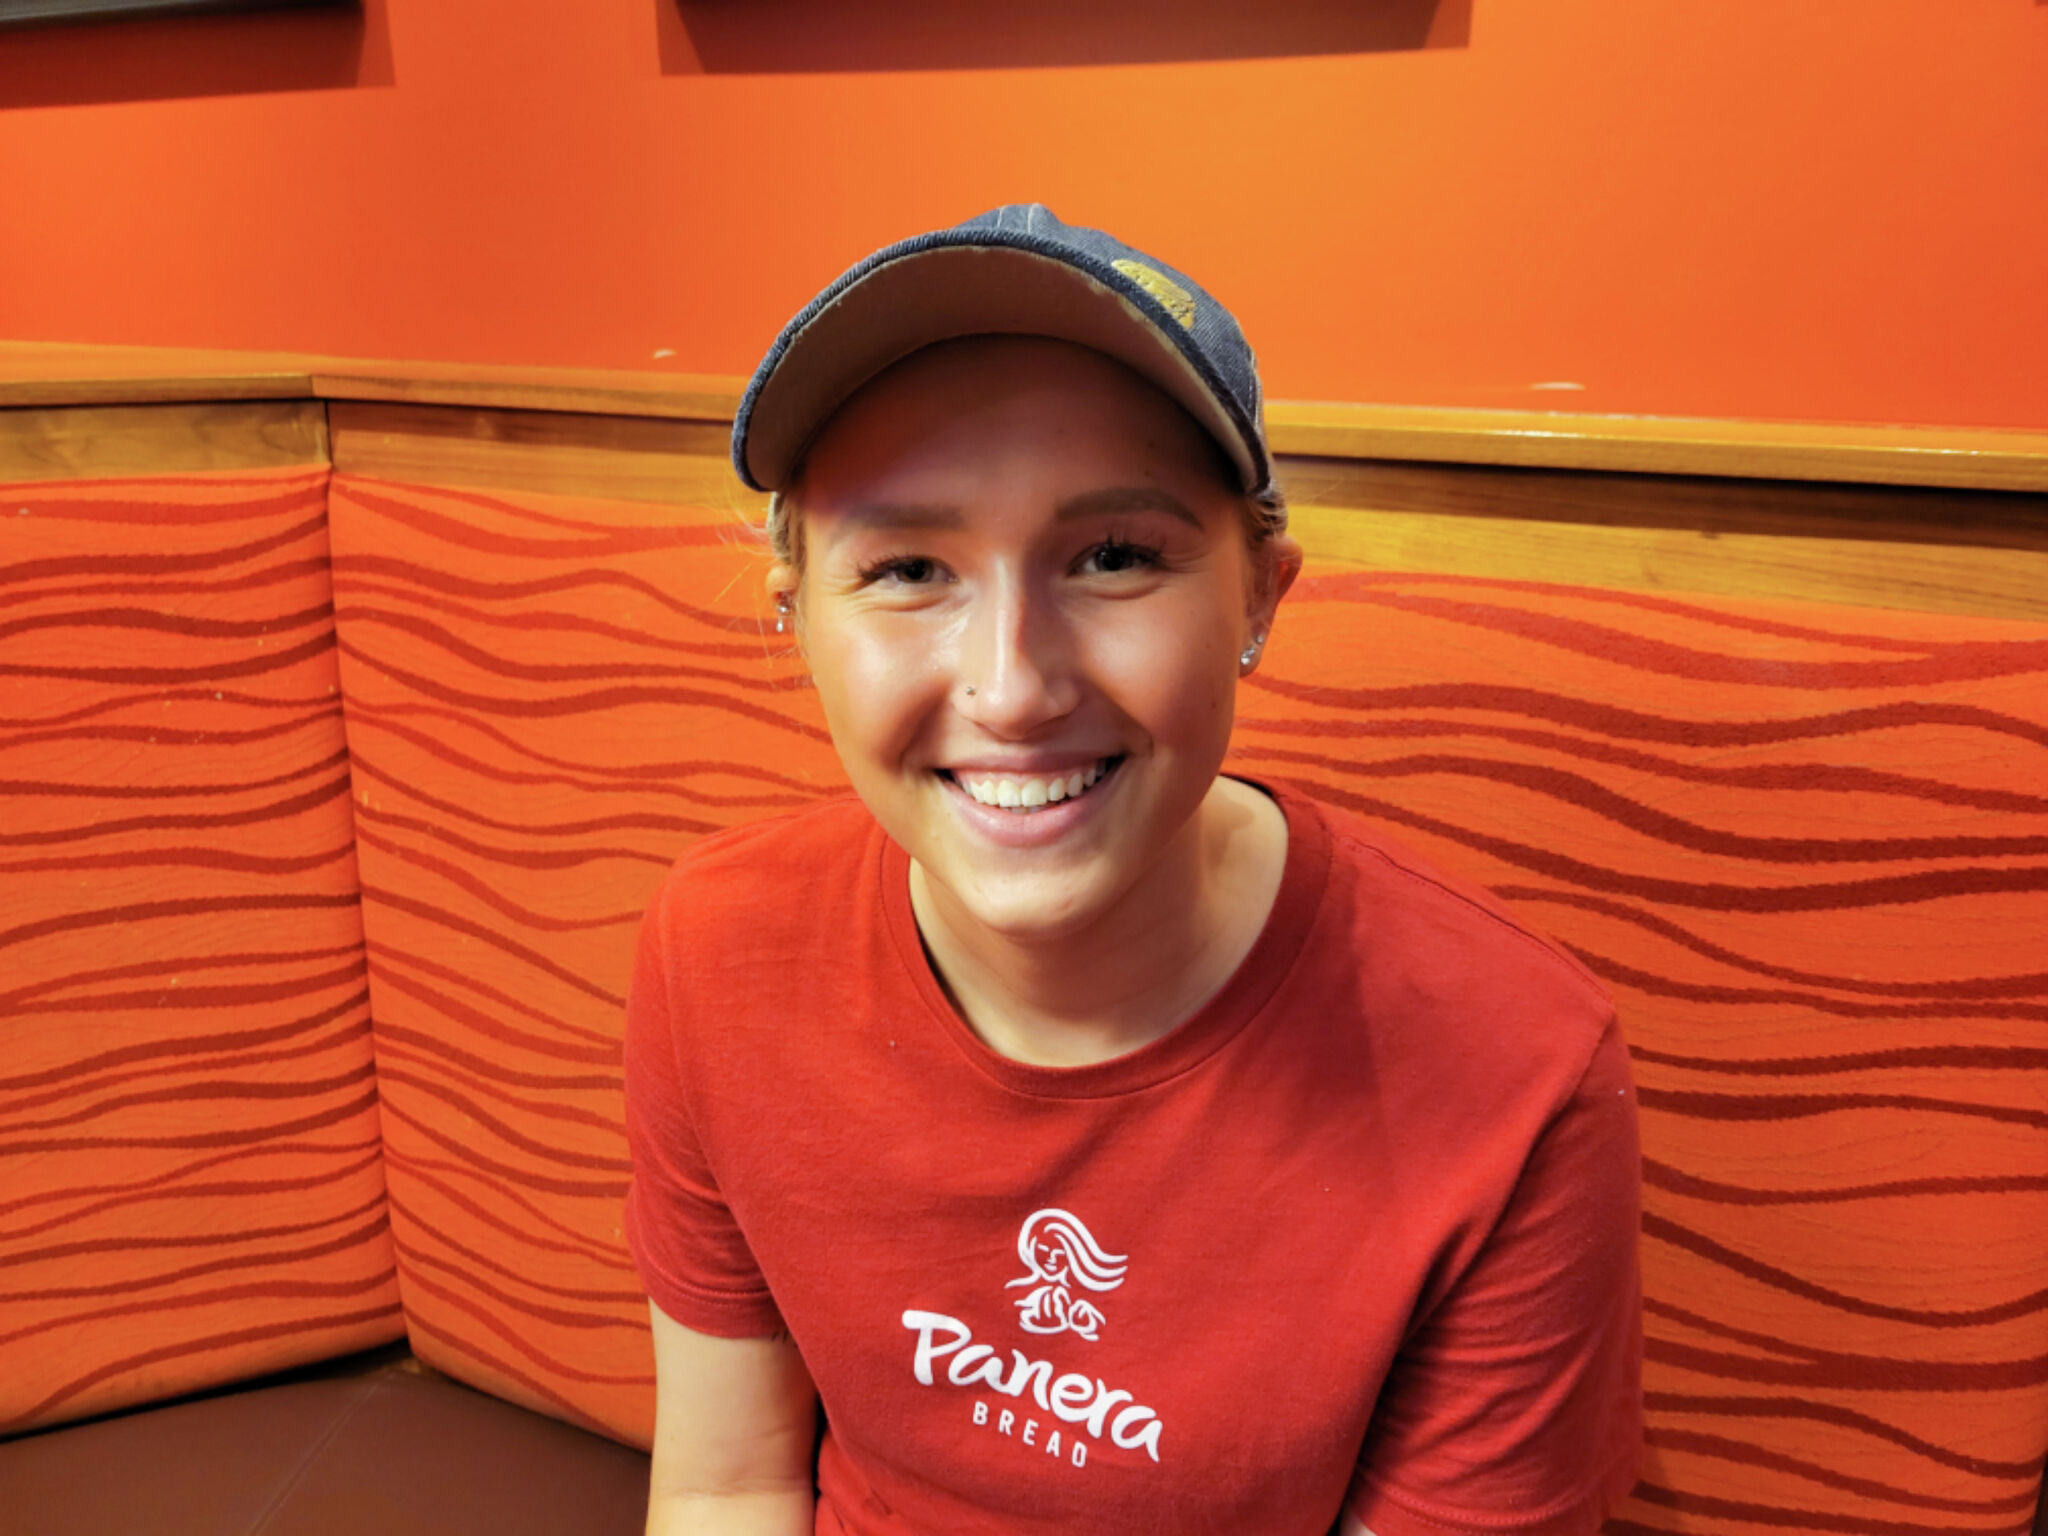 Mondays in Midland: Allyson Hundley works at Panera Bread, aspires to be a criminal profiler